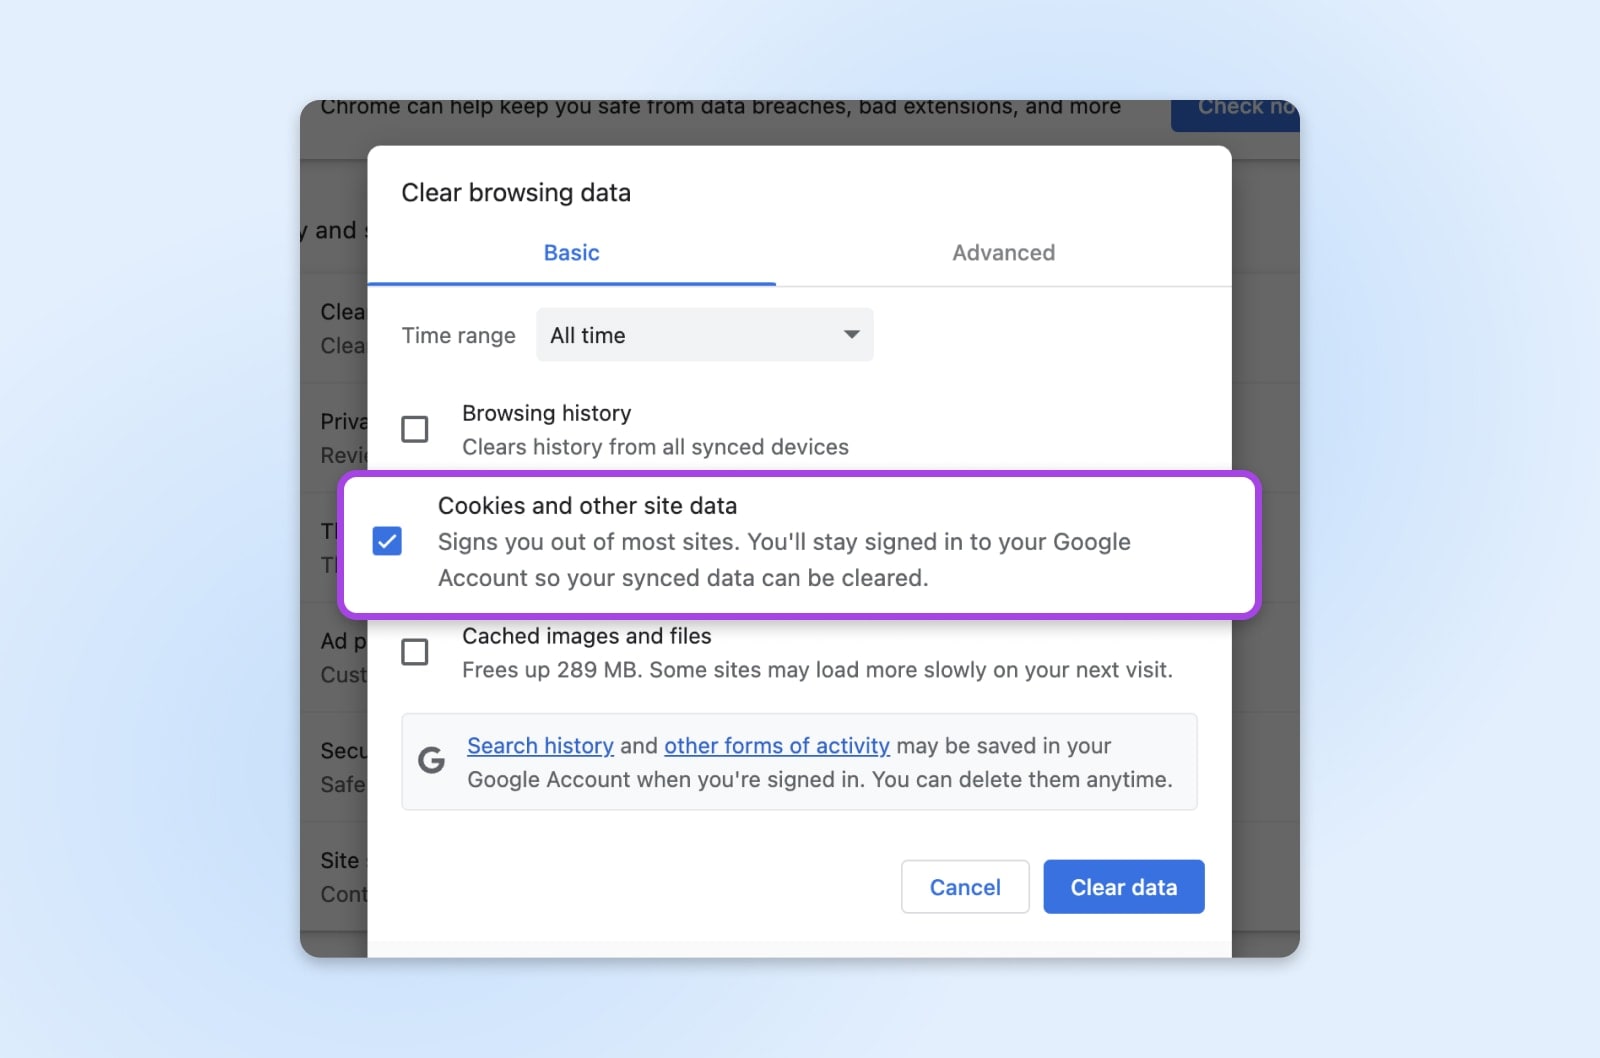 Chrome's 'Clear browsing data' window with the 'Cookies and other site data' box selected.